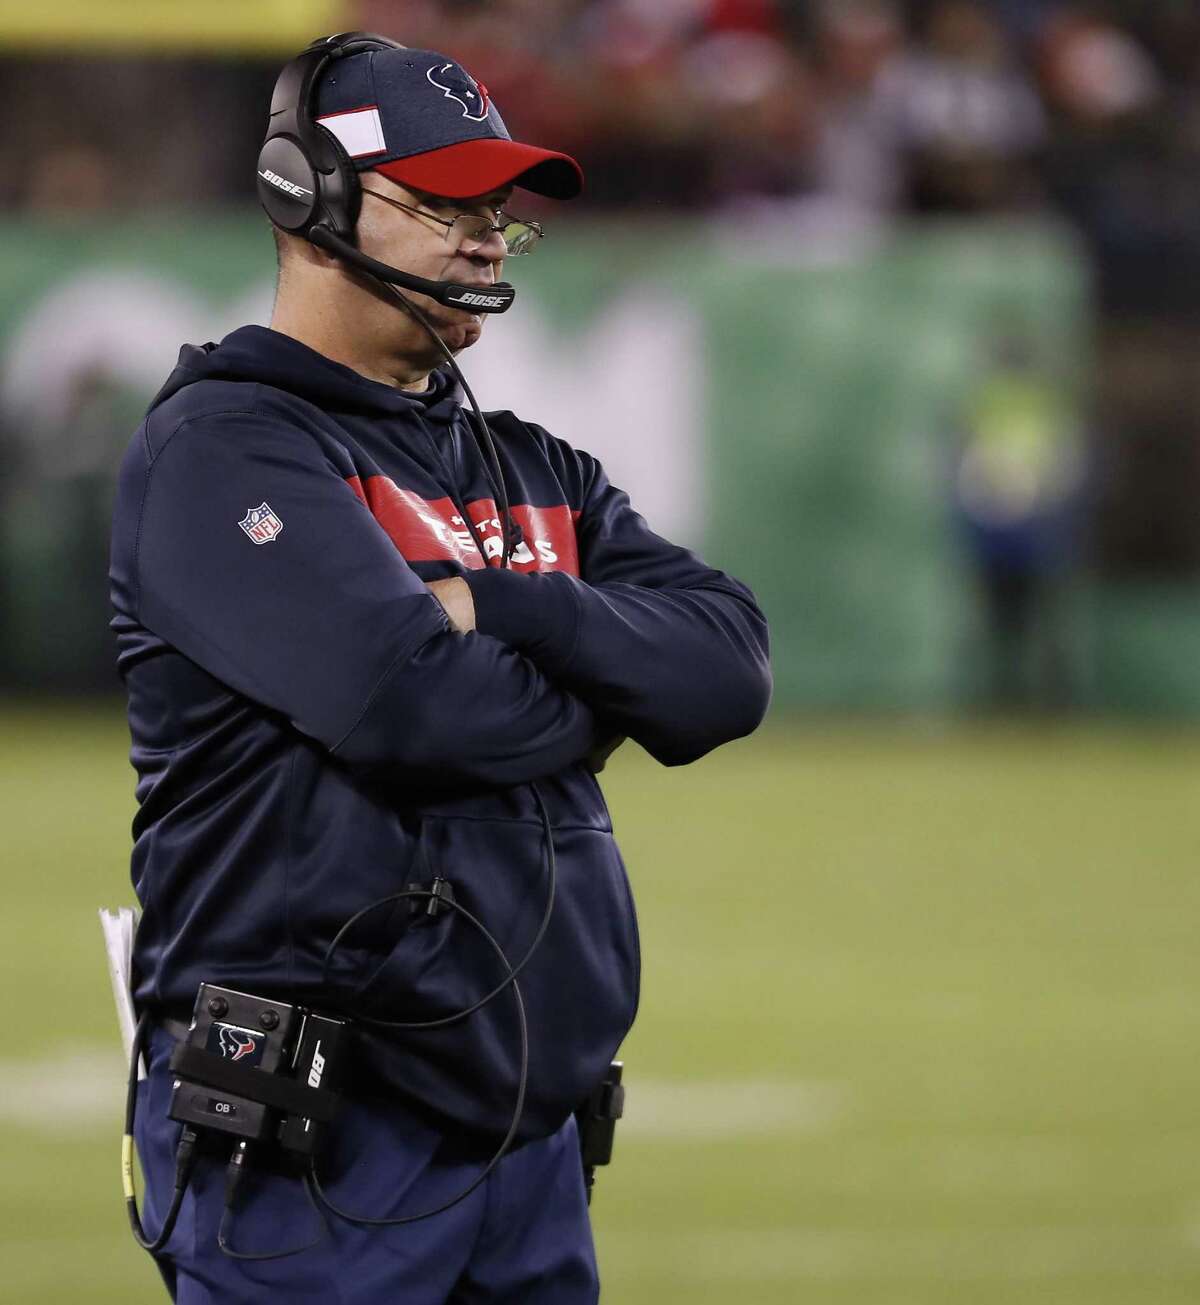 Coach Bill O'Brien only wants the Texans focusing this week on Sunday’s Eagles game and not all the playoff scenarios.